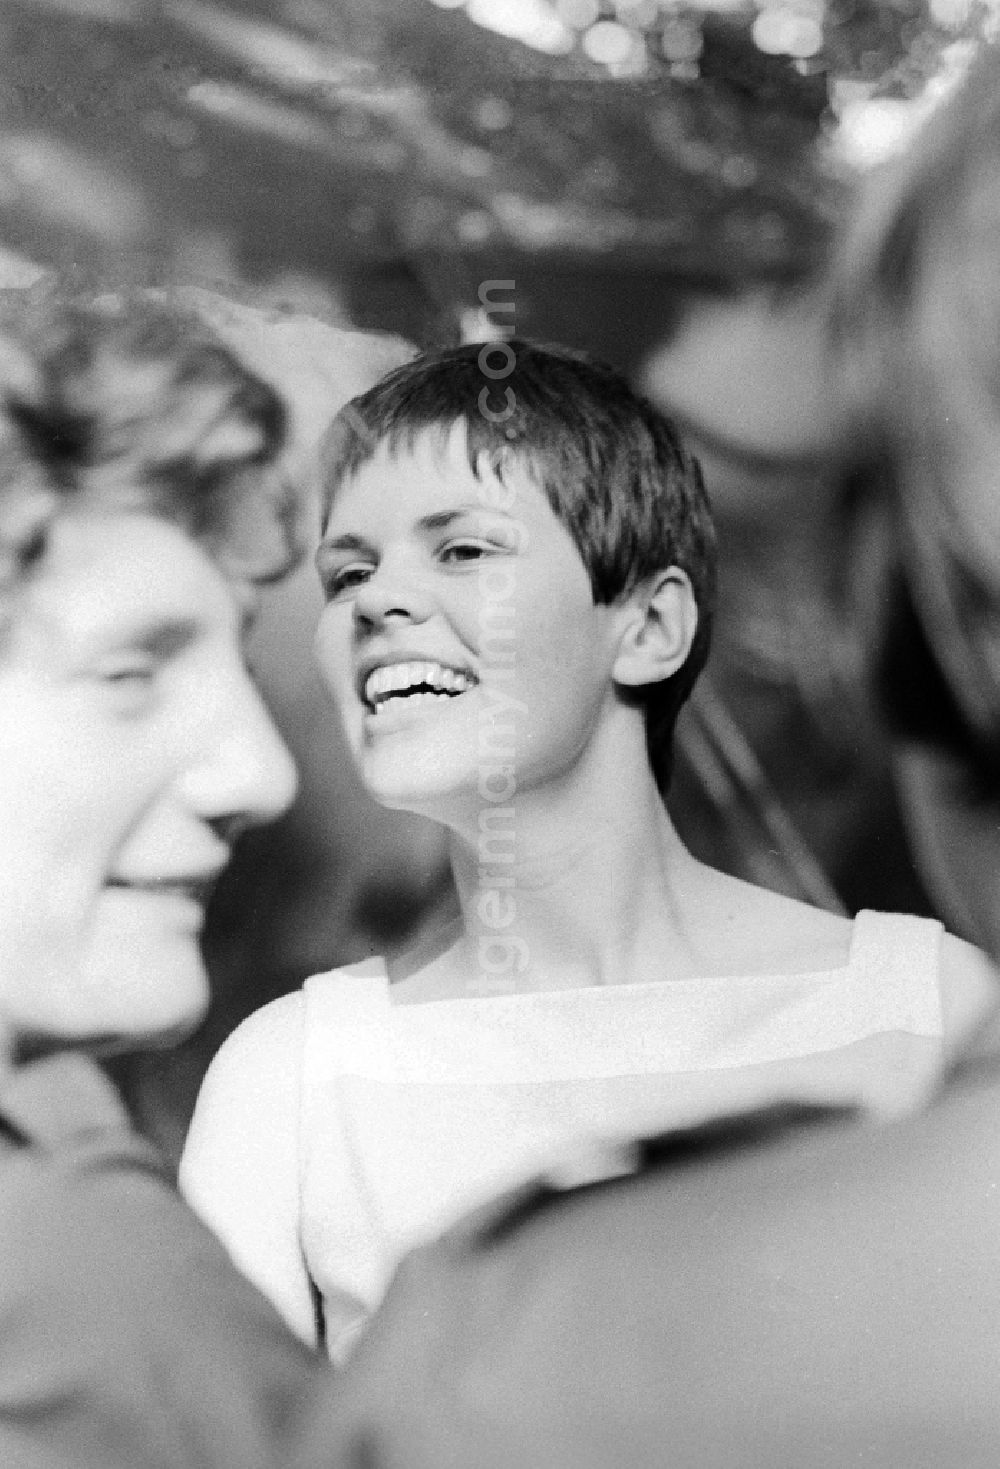 GDR image archive: Chemnitz - The singer, actress and painter Chris Doerk in Chemnitz in Saxony on the territory of the former GDR, German Democratic Republic. Here at Pentecost meeting of the Youth 1967 in Karl-Marx-Stadt Chemnitz today